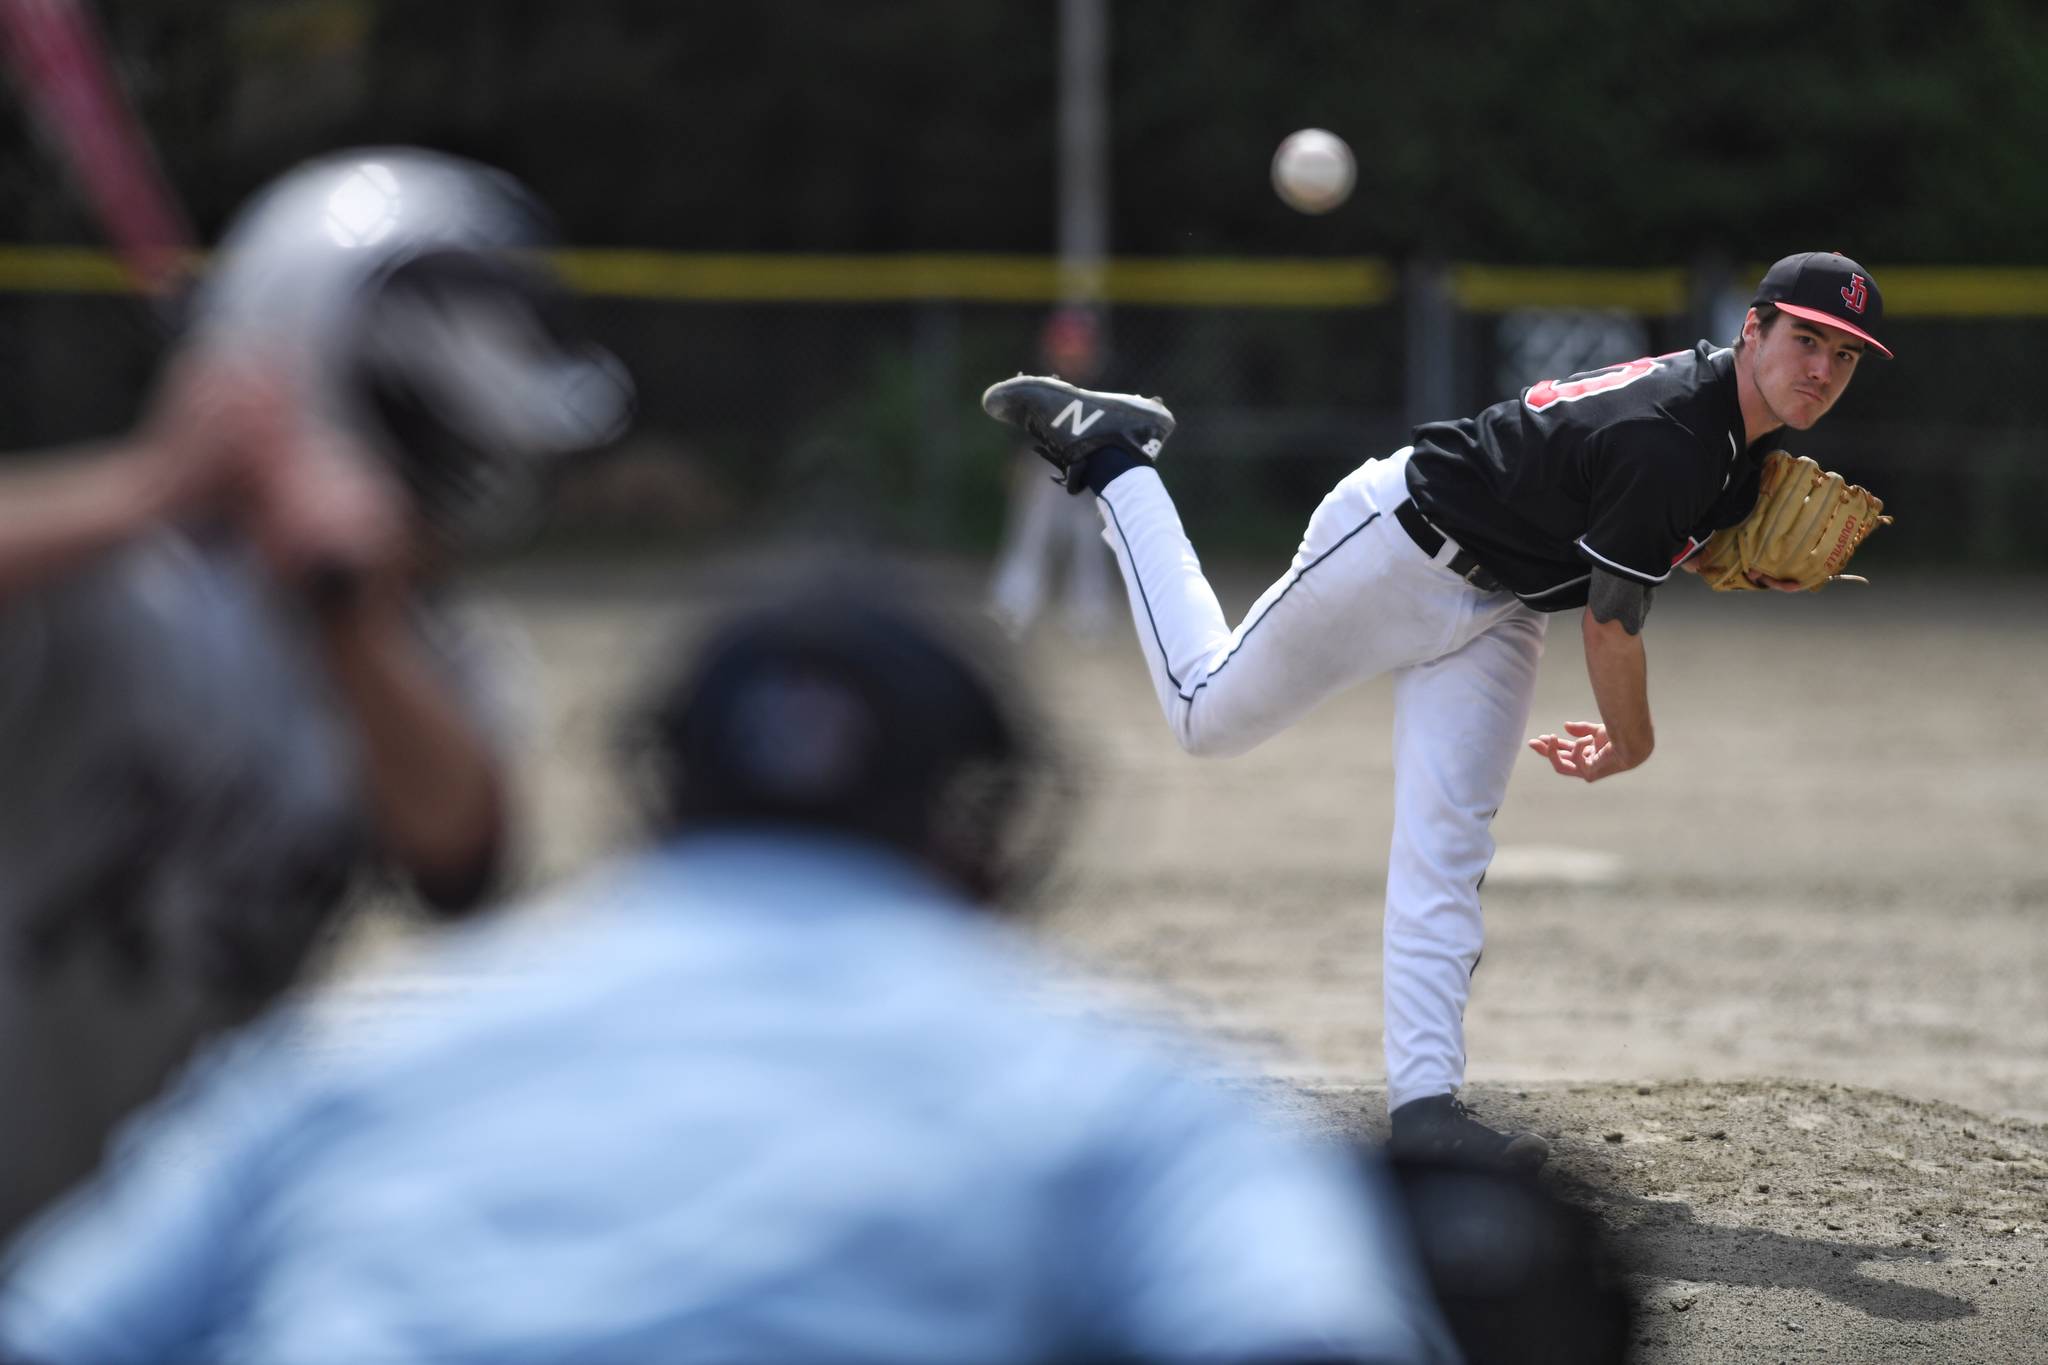 Juneau-Douglas’ Olin Rawson pitches against Ketchikan’s Brock King to start off their game during the Region V Baseball Championship at Adair-Kennedy Memorial Park on Friday, May 24, 2019. (Michael Penn | Juneau Empire)